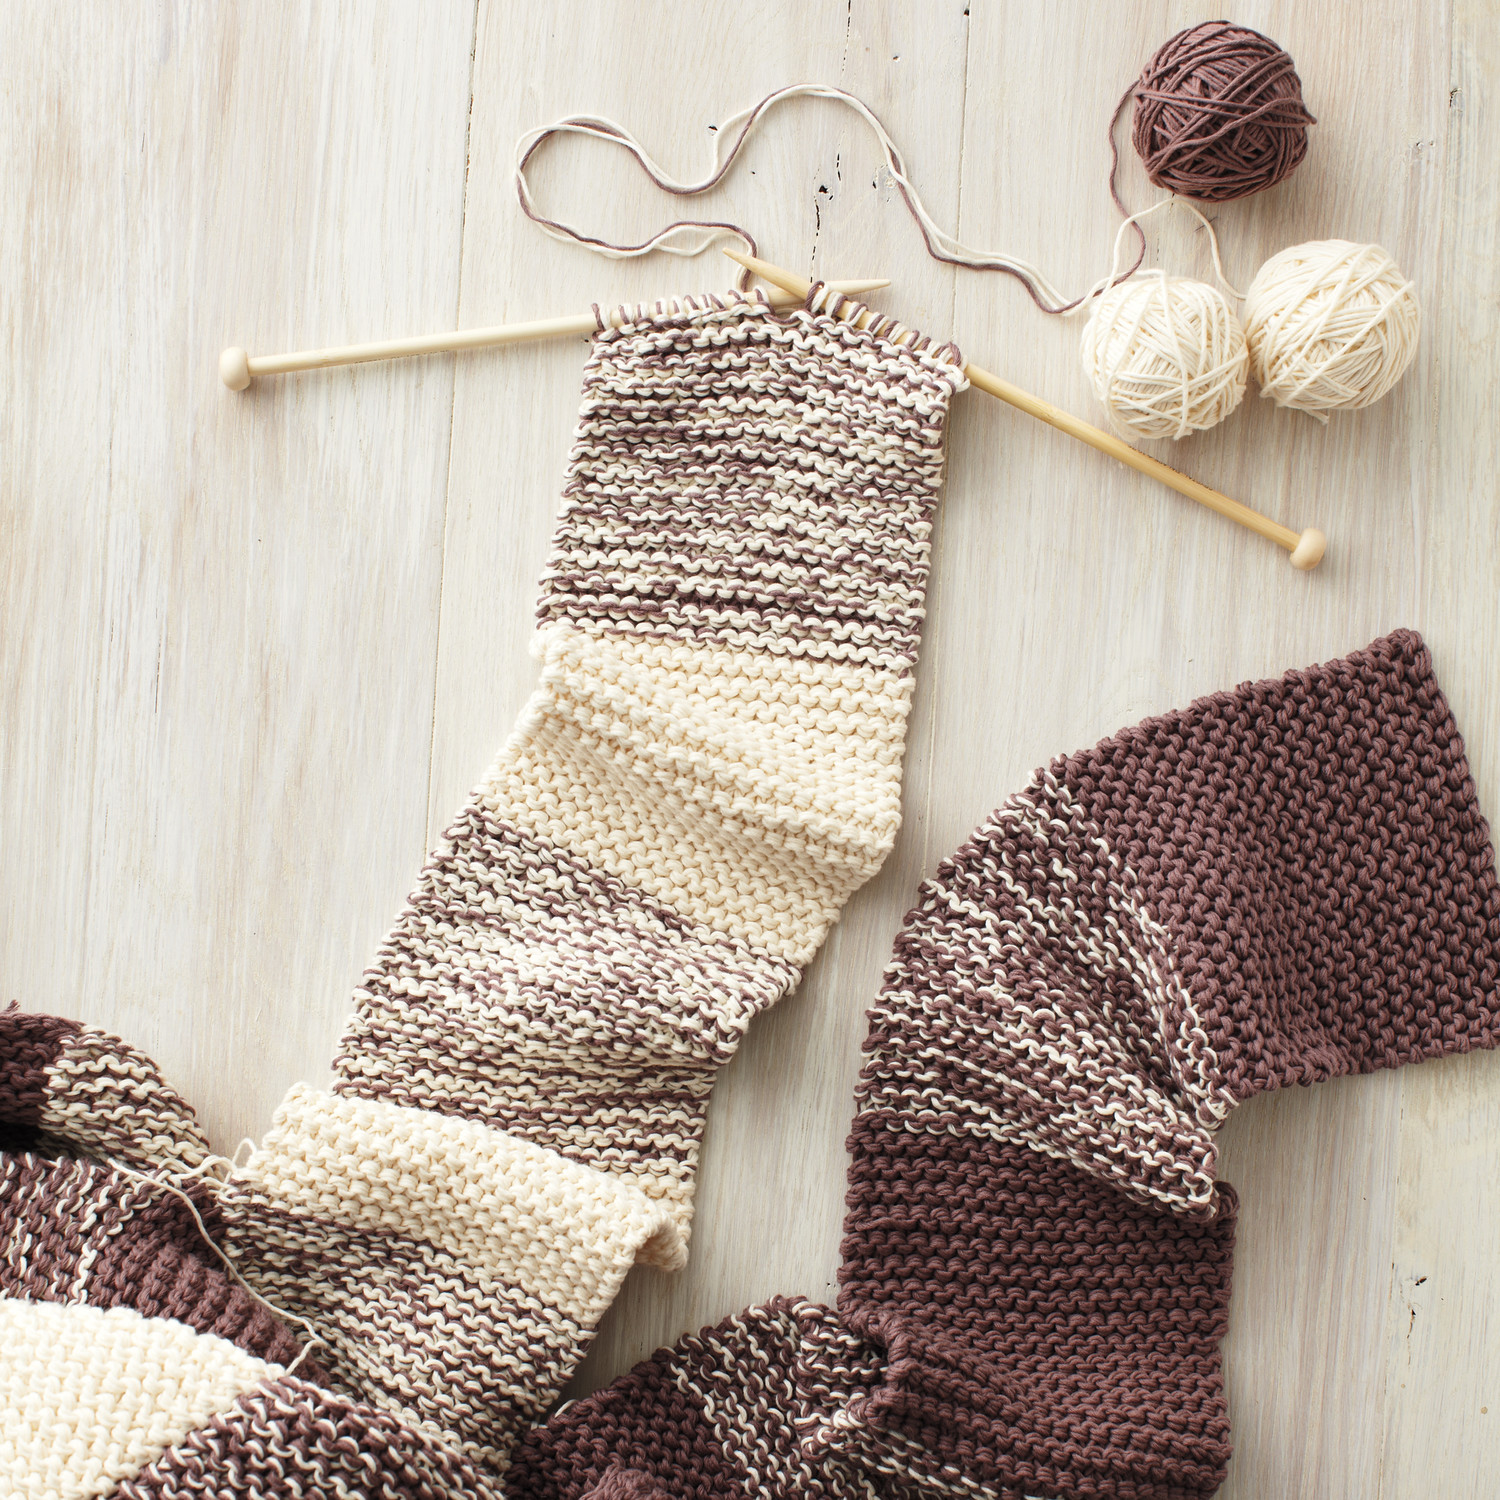 Knitting Ideas: Charming Patterns and Creative Projects  Martha Stewart